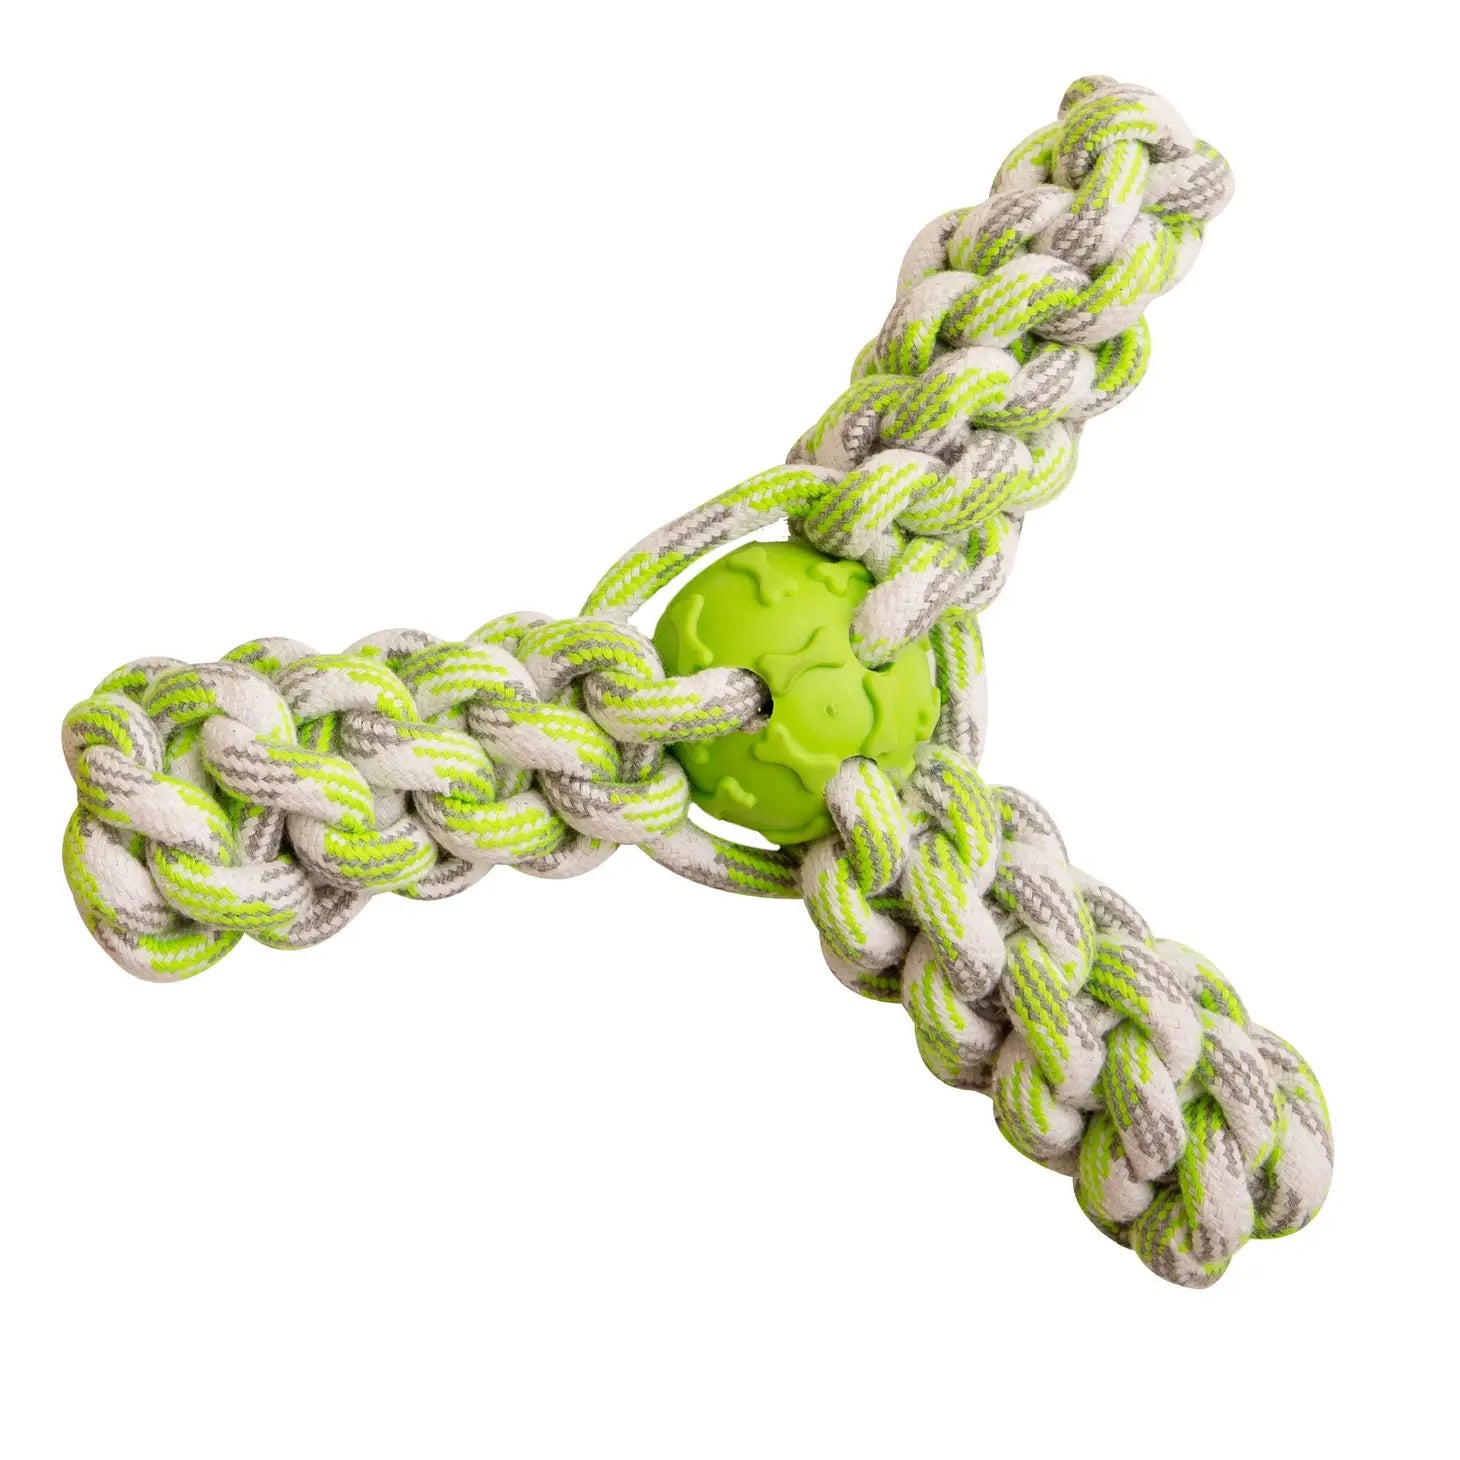 Fling N' Fun Rope Dog Toy is a braided rope dog toy with a green ball in the center